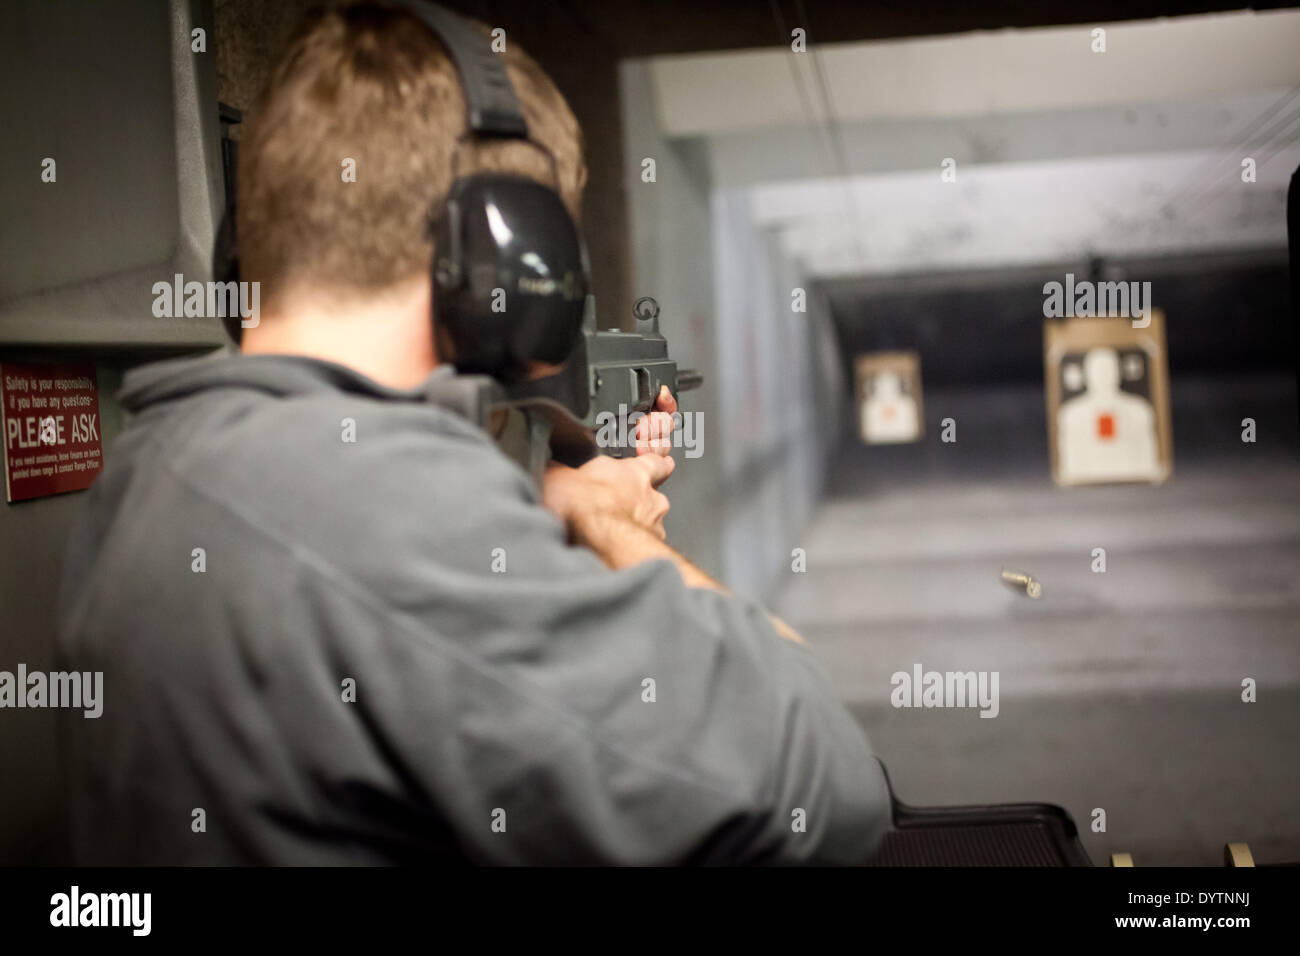 Man at a shooting range shooting at targets with a rifle made by the German defense manufacturing company Heckler & Koch, in April 2013. Stock Photo